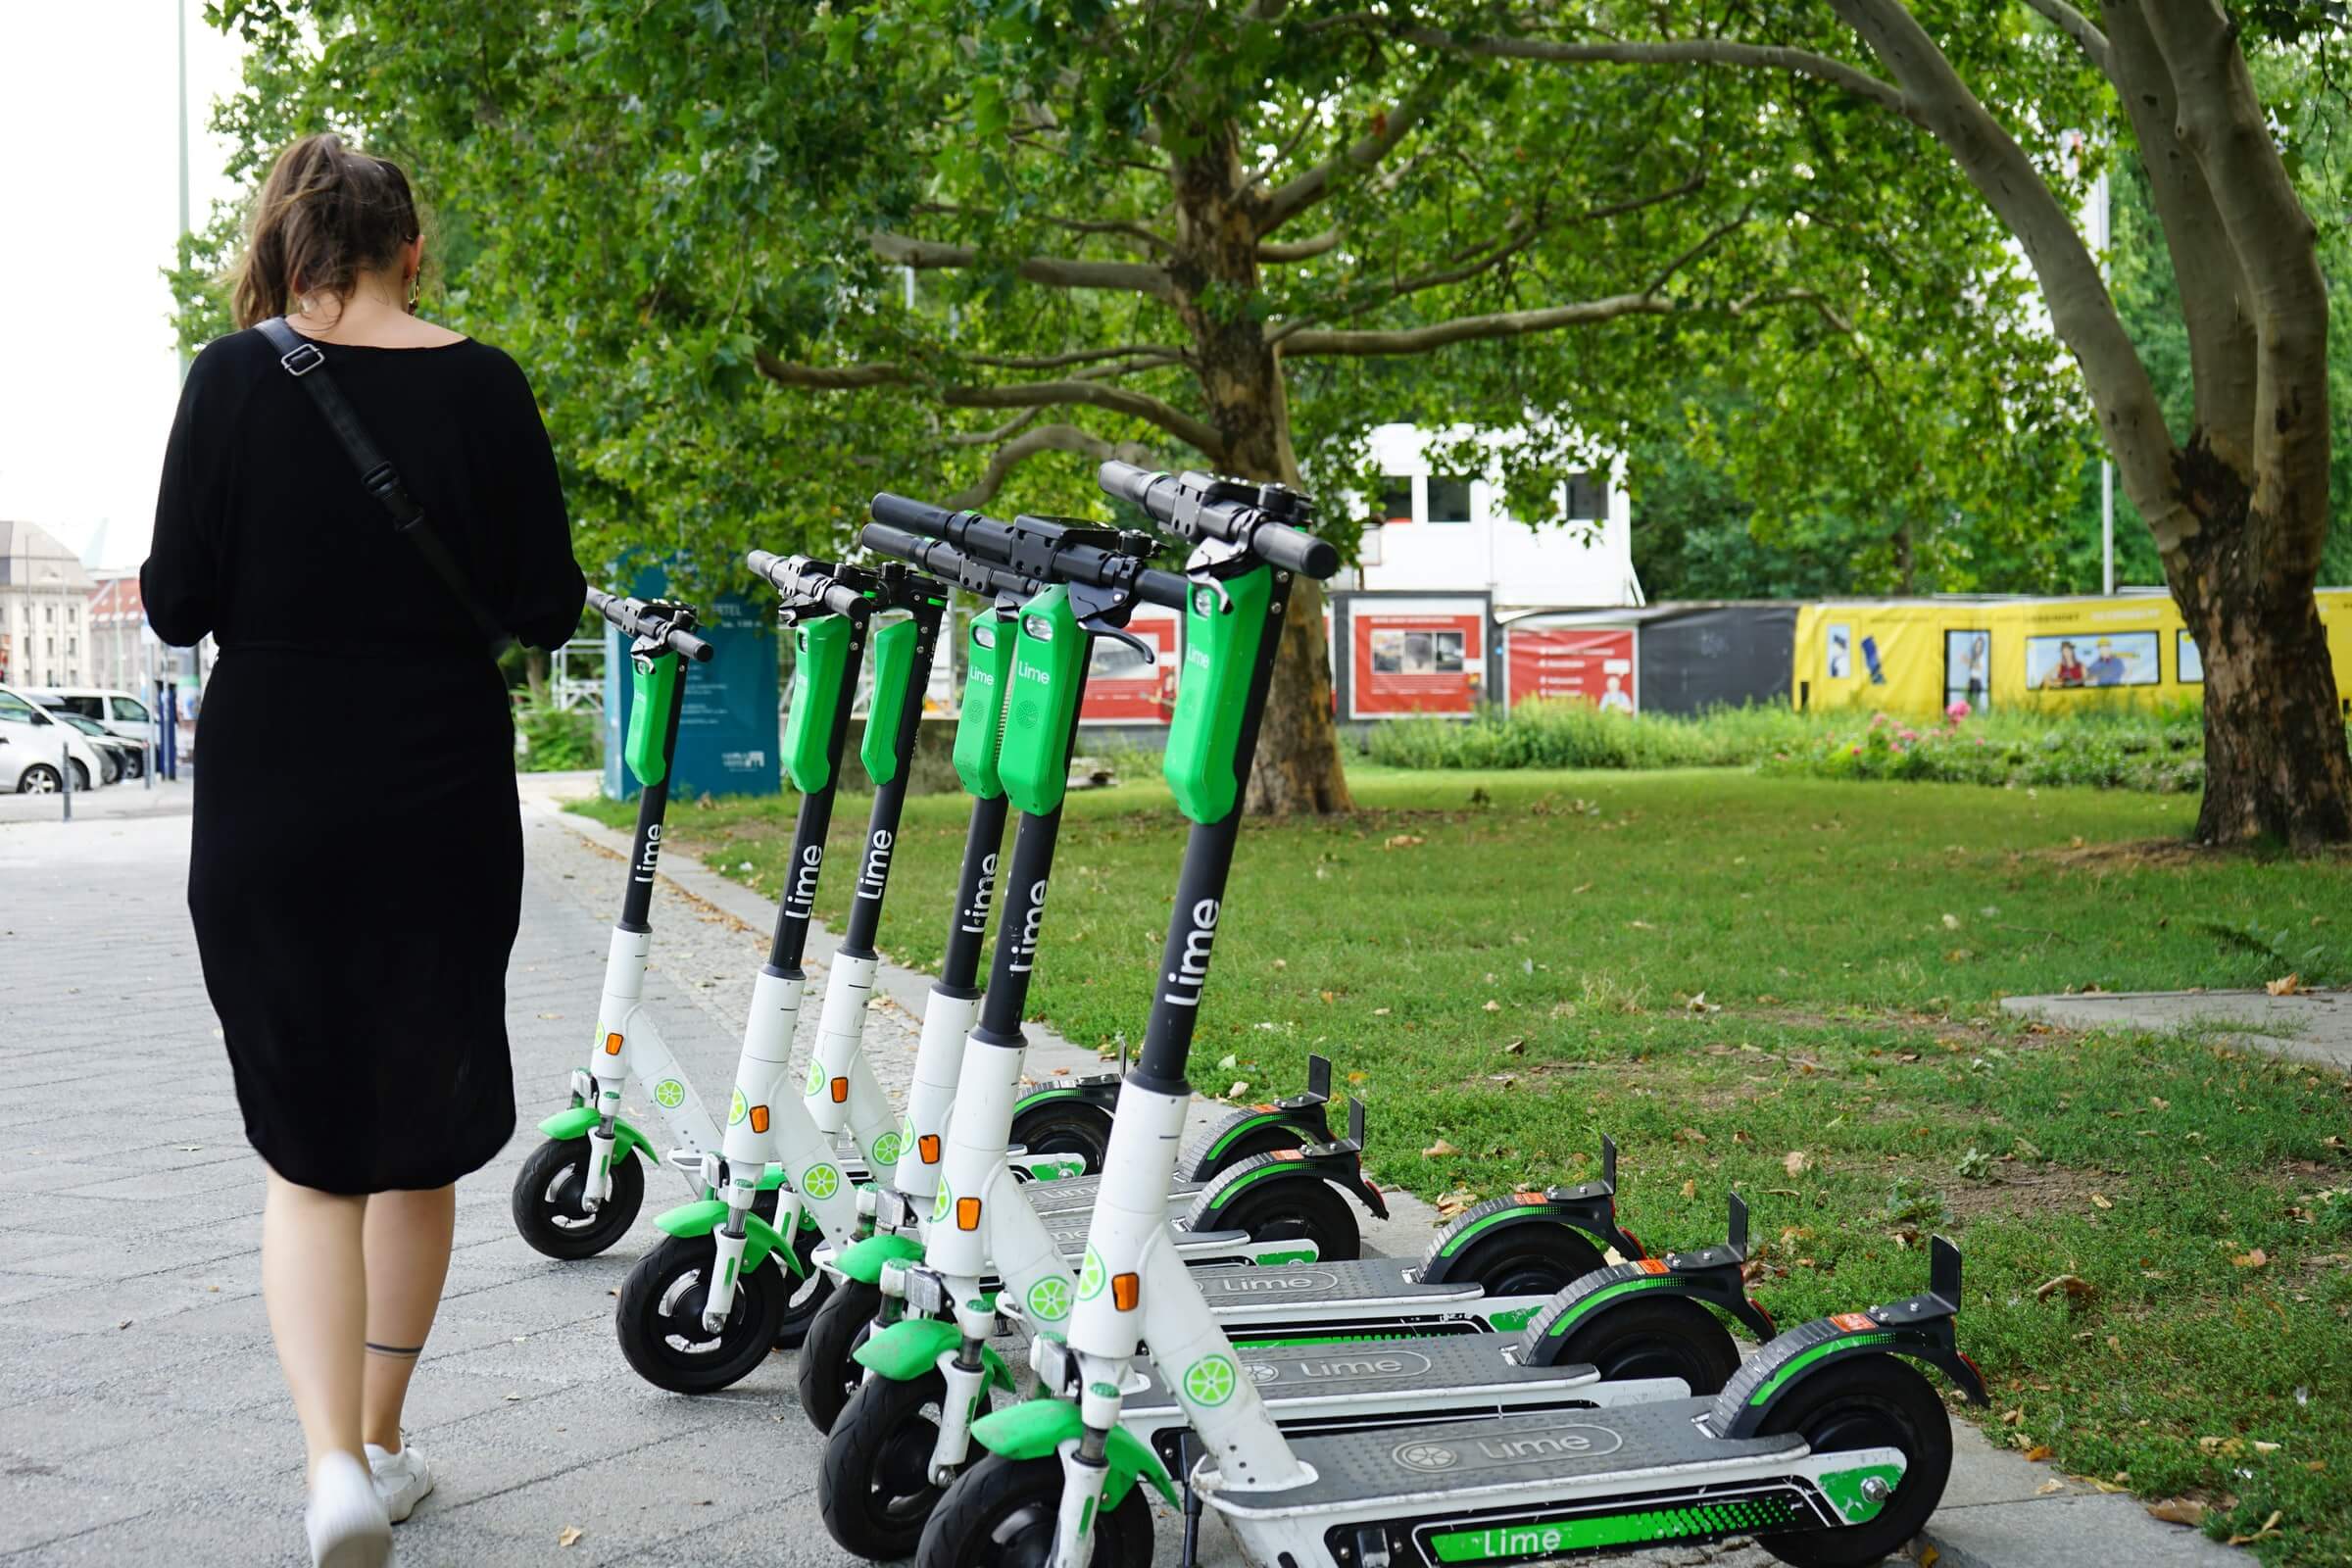 Uber may lead $170M investment in scooter startup Lime